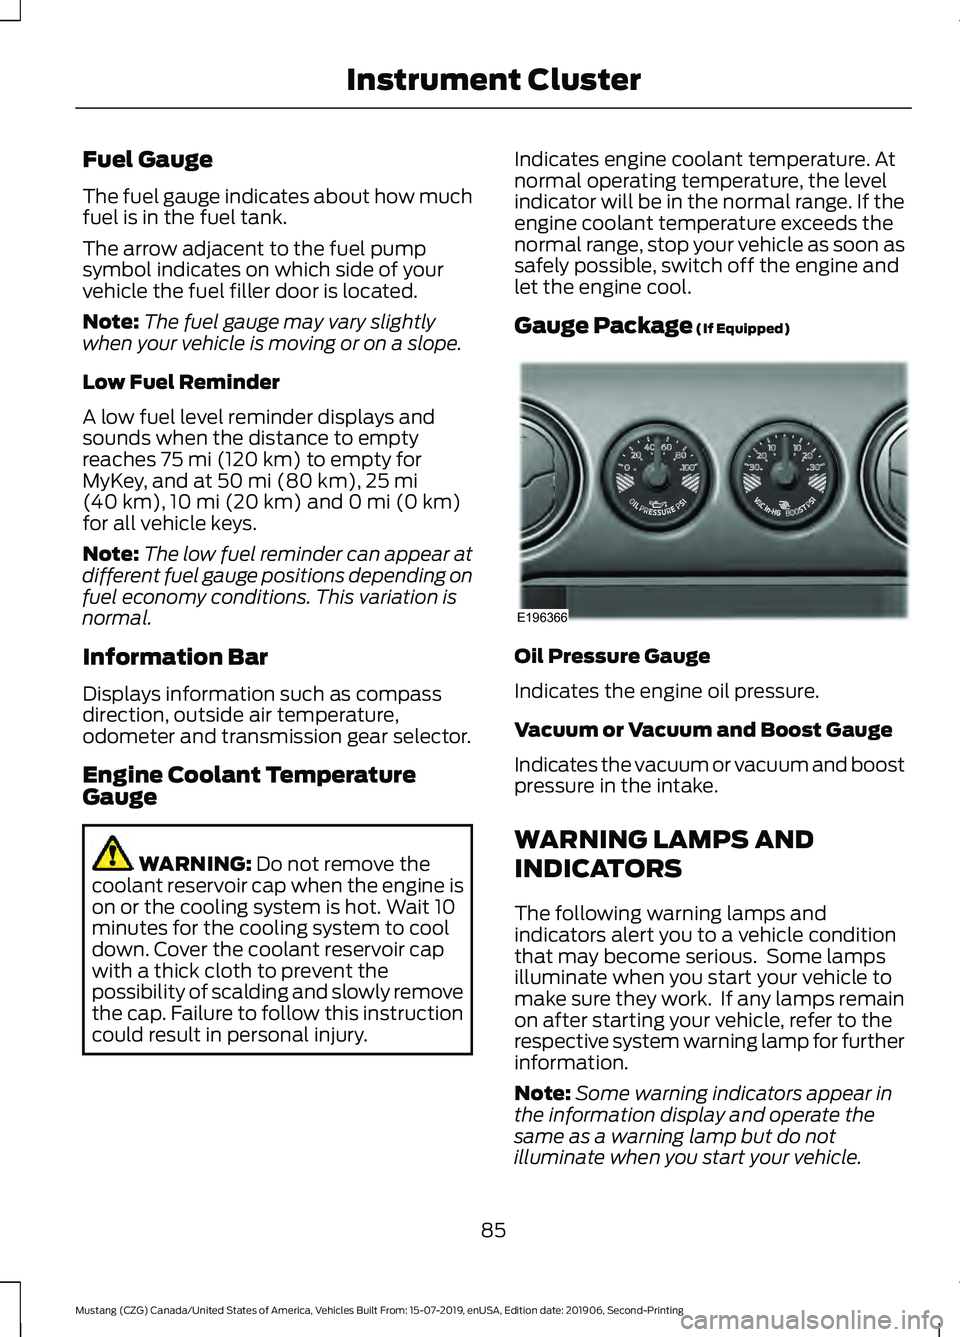 FORD MUSTANG 2020  Owners Manual Fuel Gauge
The fuel gauge indicates about how much
fuel is in the fuel tank.
The arrow adjacent to the fuel pump
symbol indicates on which side of your
vehicle the fuel filler door is located.
Note:
T